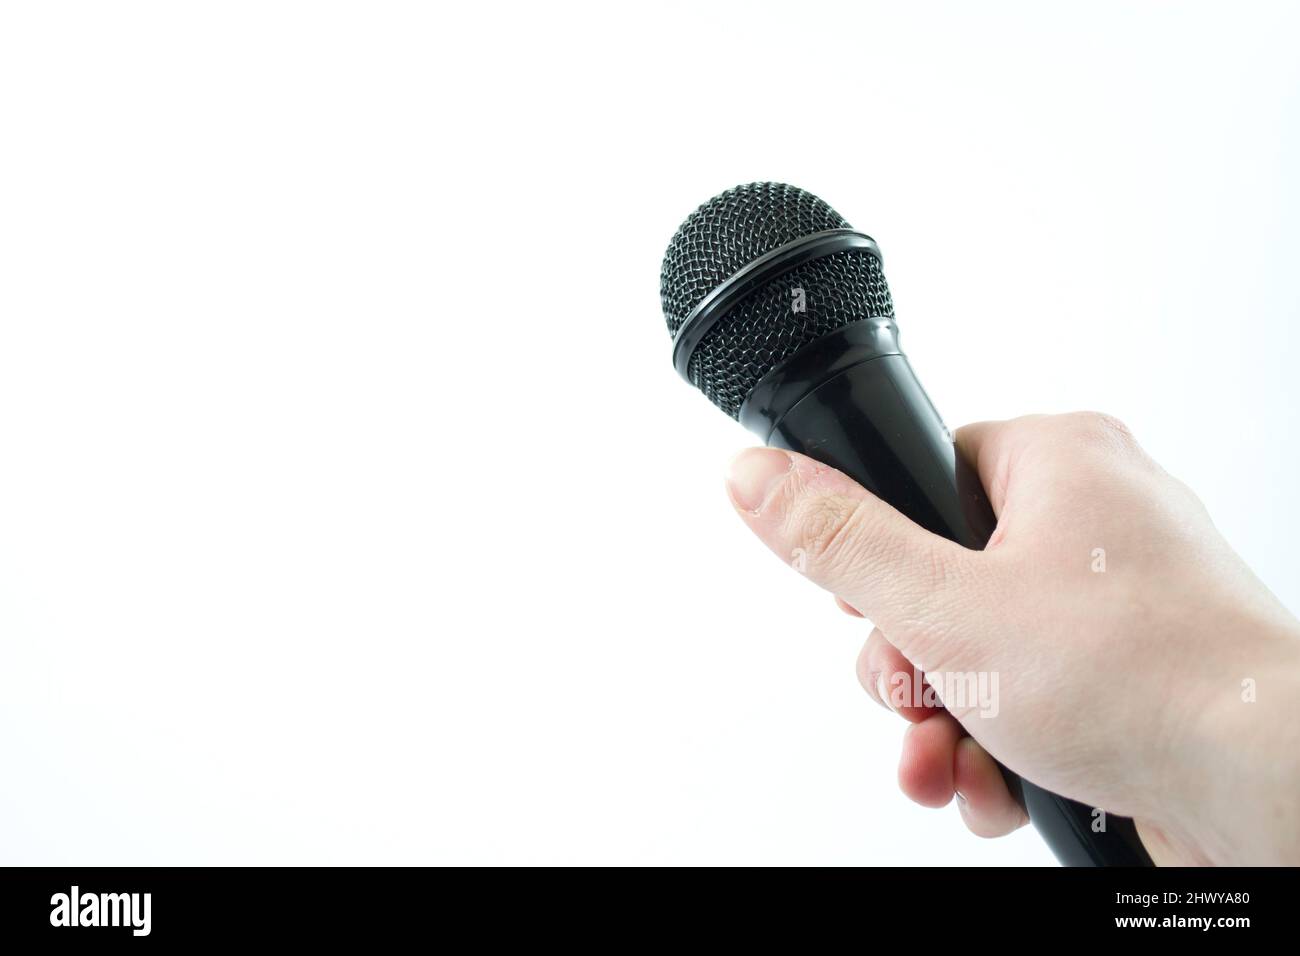 hand holding a microphone on white background Stock Photo